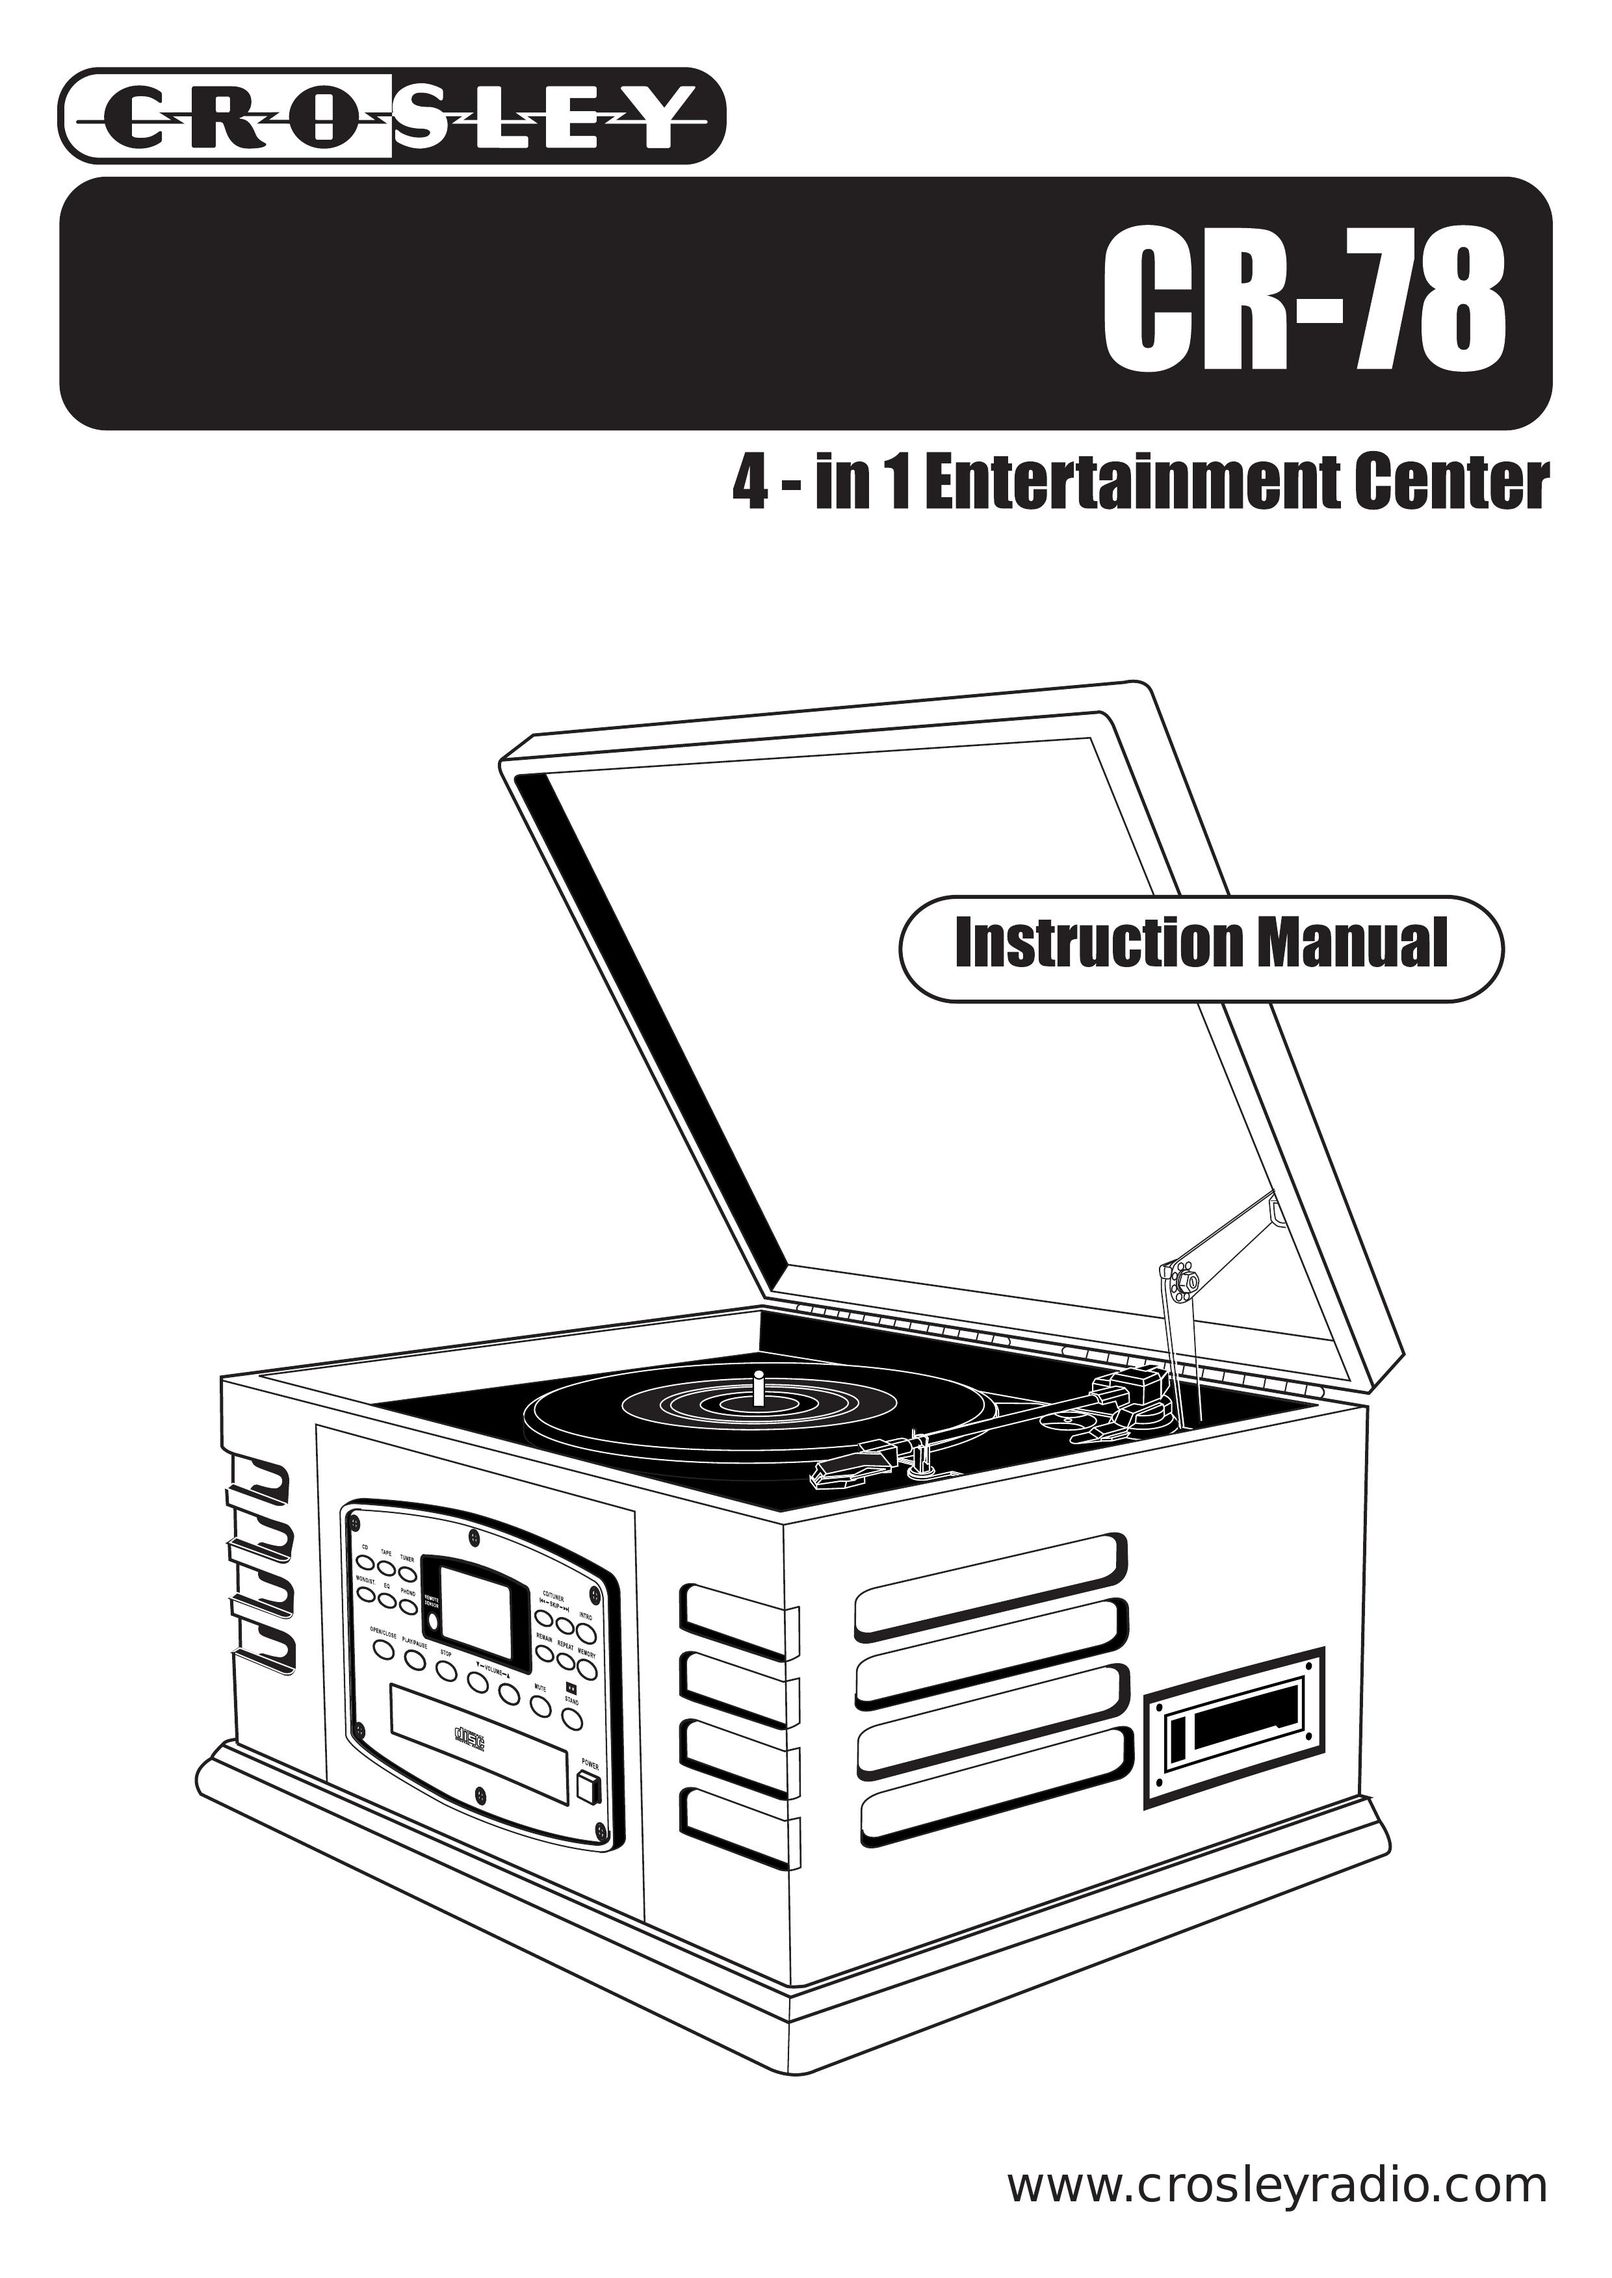 Crosley CR-78 Home Theater System User Manual